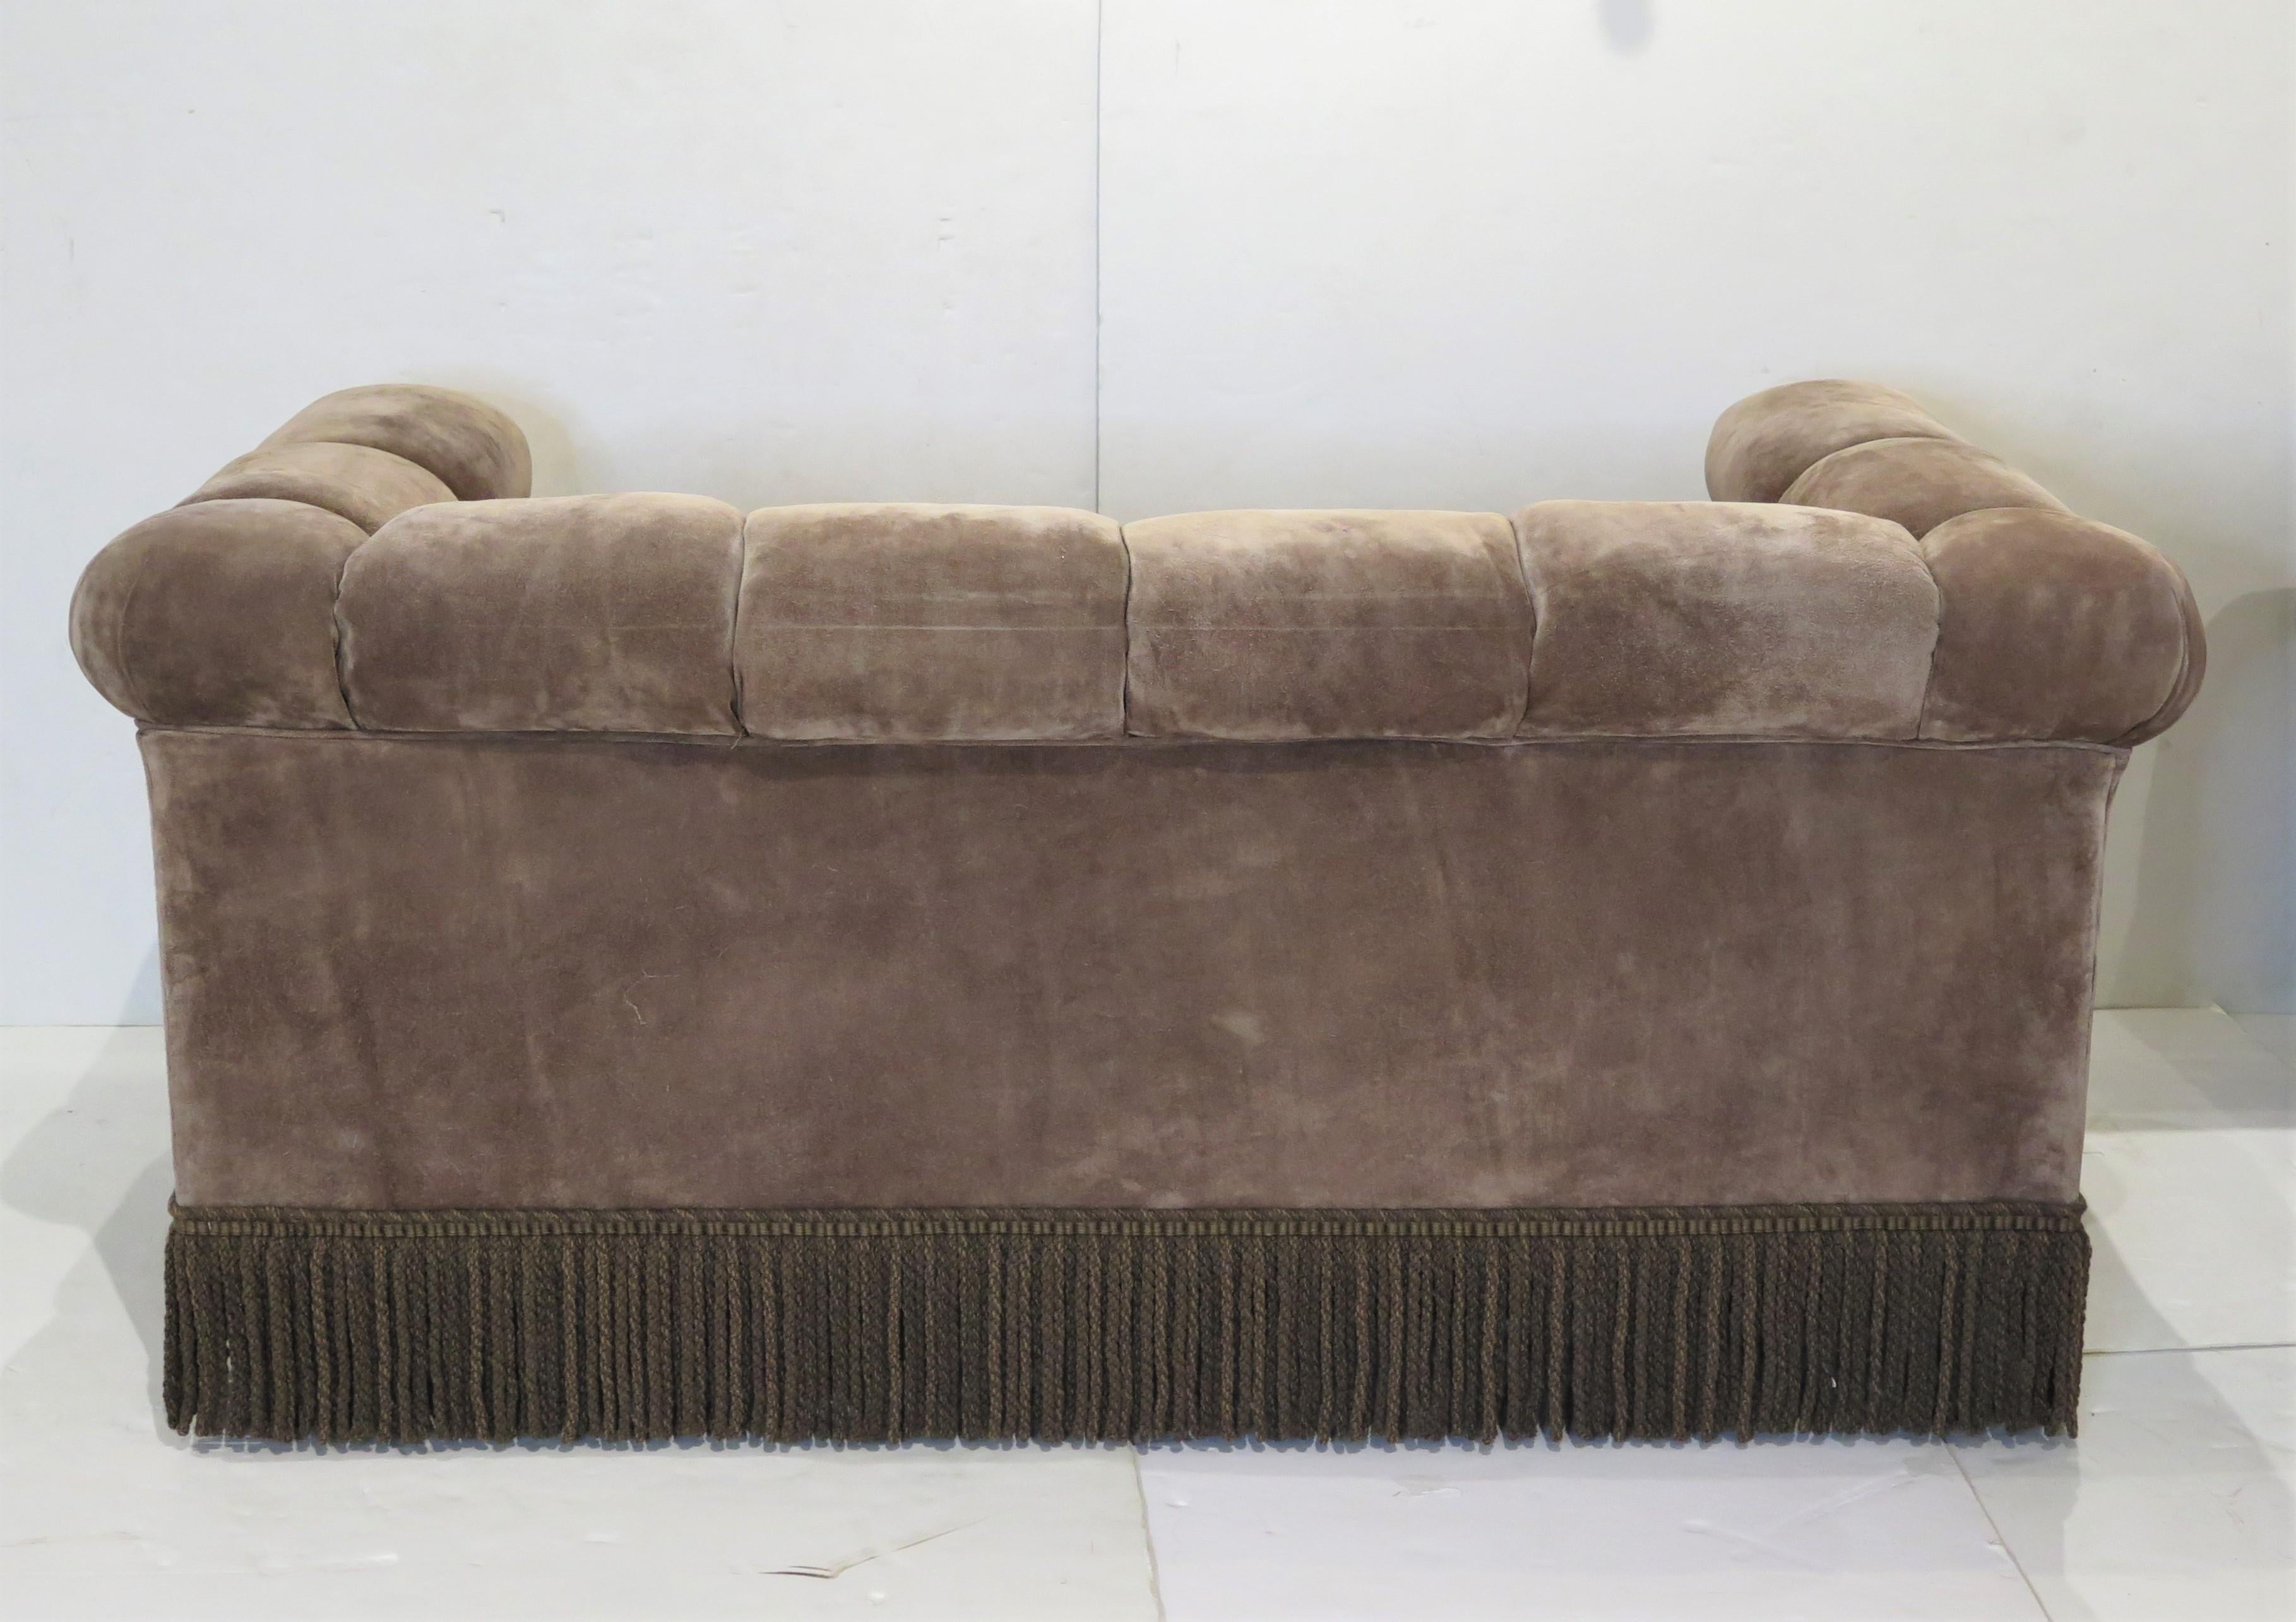 Hand-Crafted Pair of Mid-Century Suede Chesterfield Sofas by Dunbar